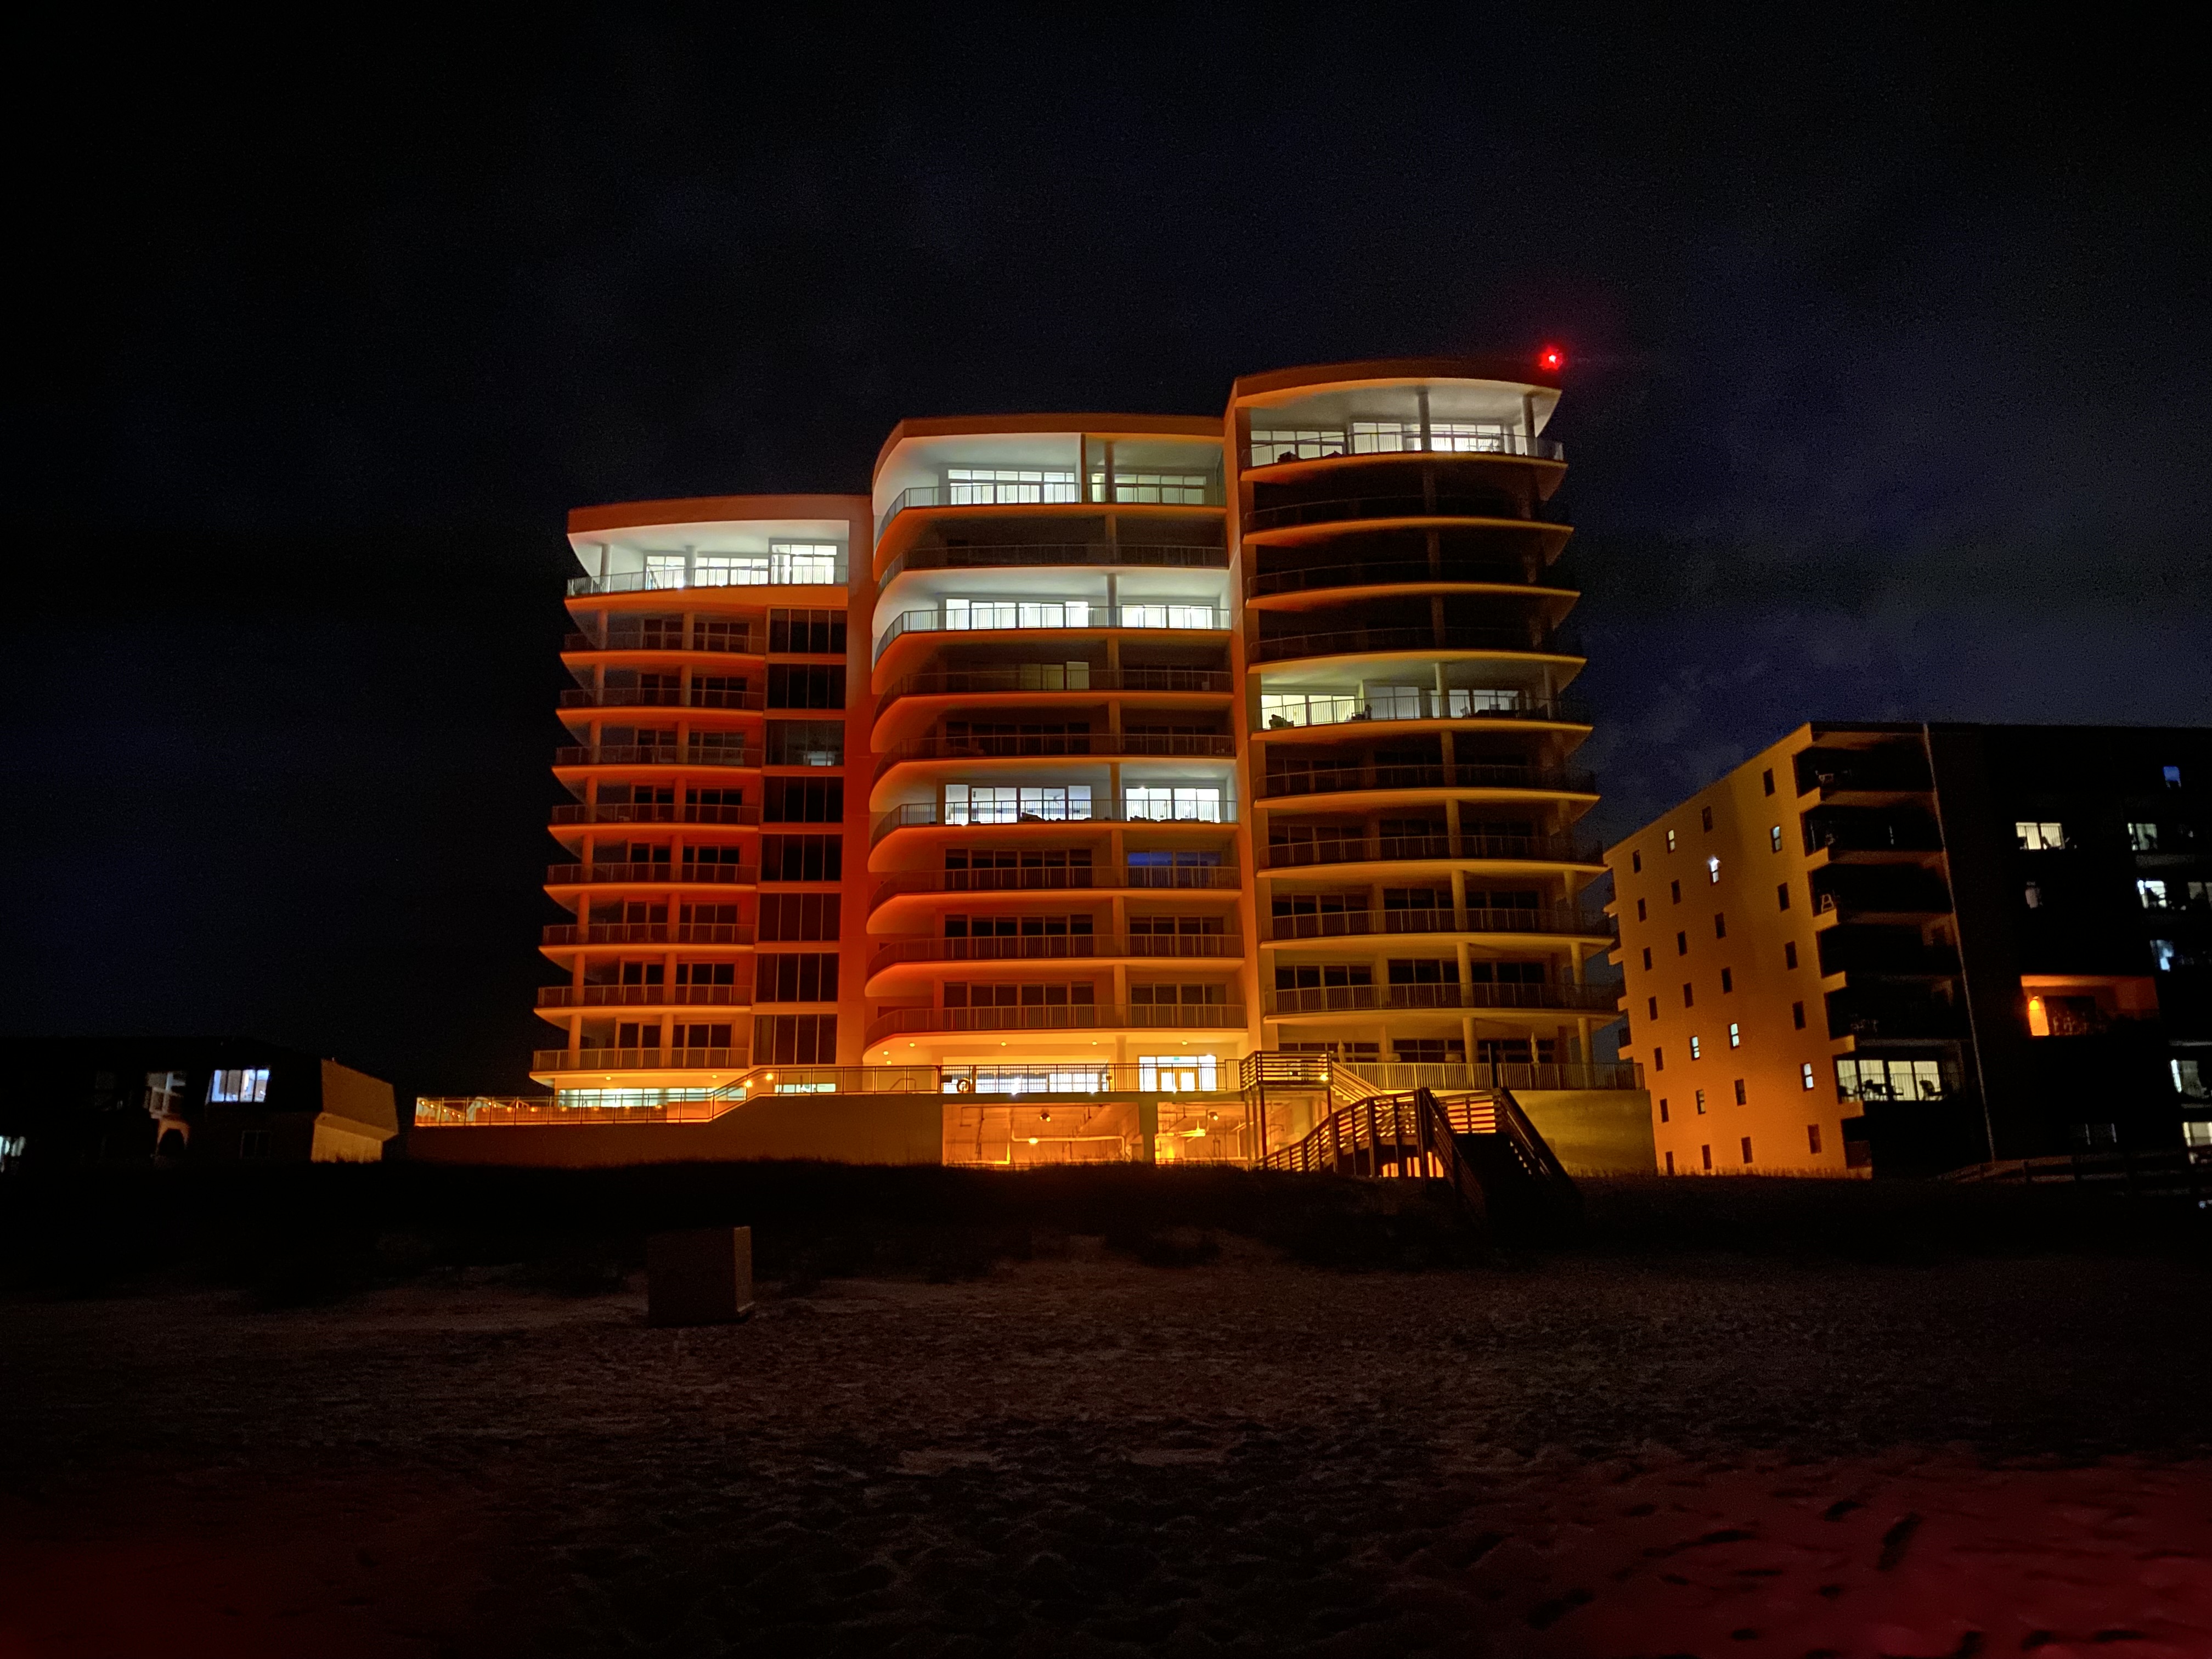 A condo on the beach shows off wildlife friendly lighting